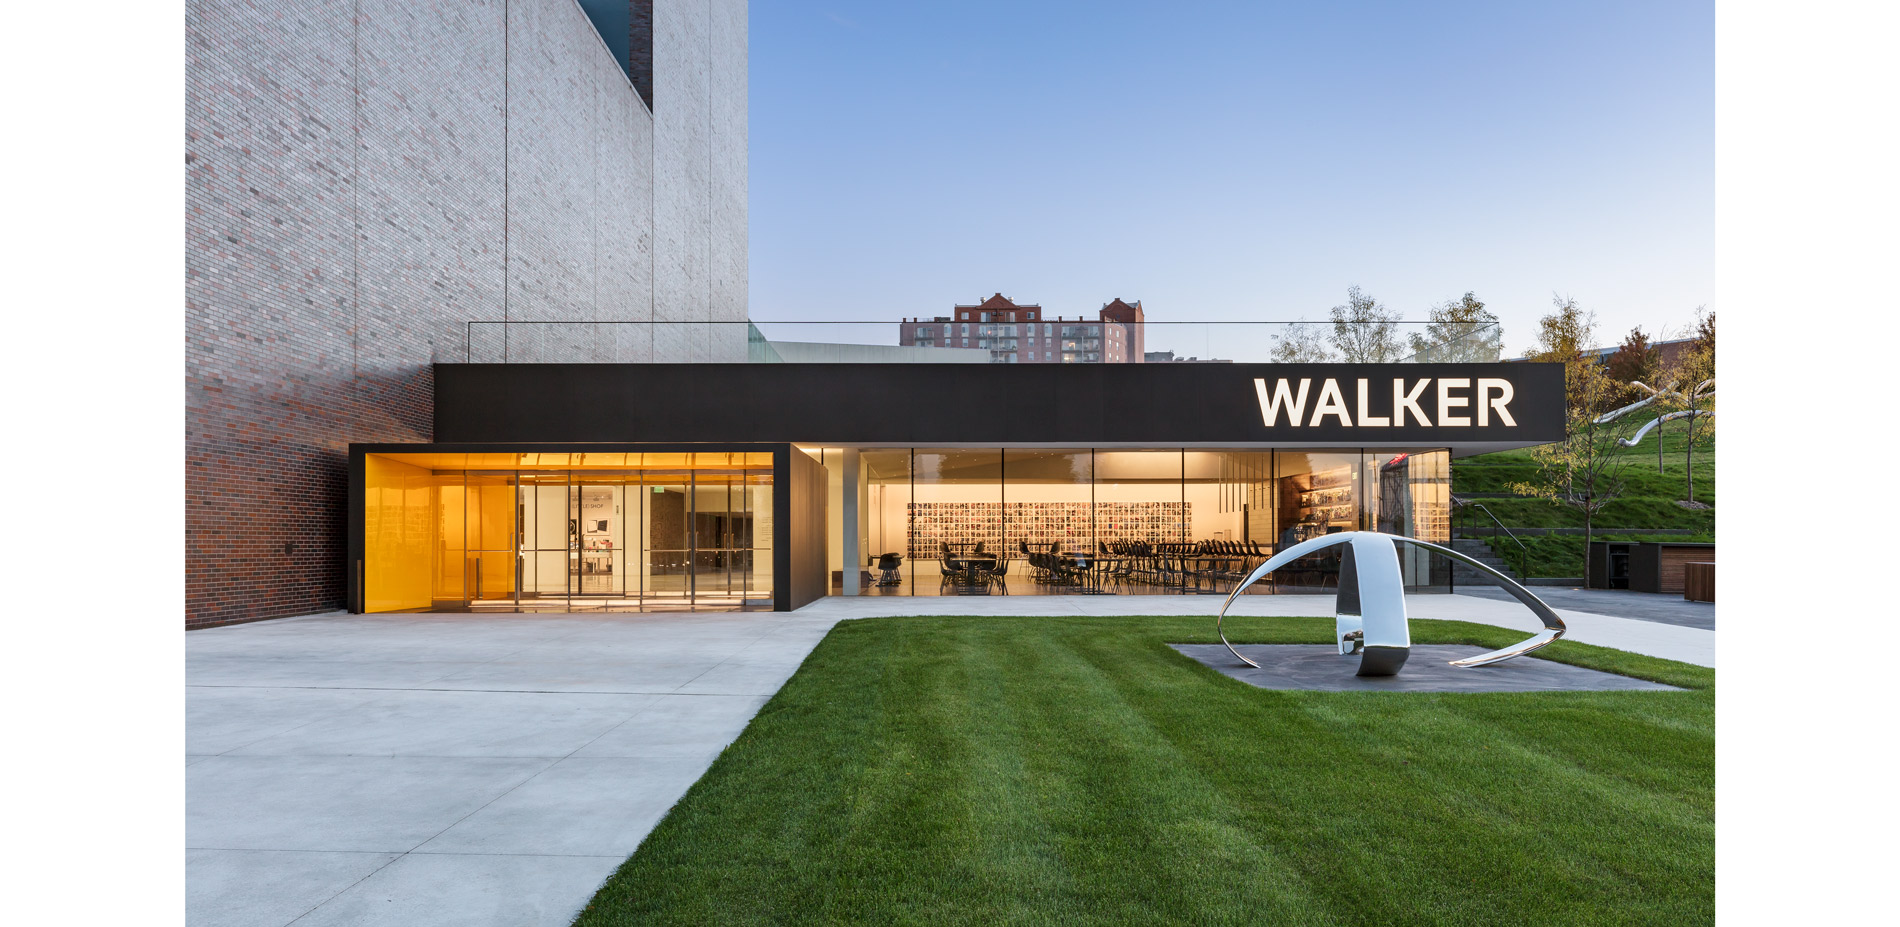 The Walker previously lacked an engaging public space which unified the distinctive architecture and landscape. A dining patio accented by the Honeylo…